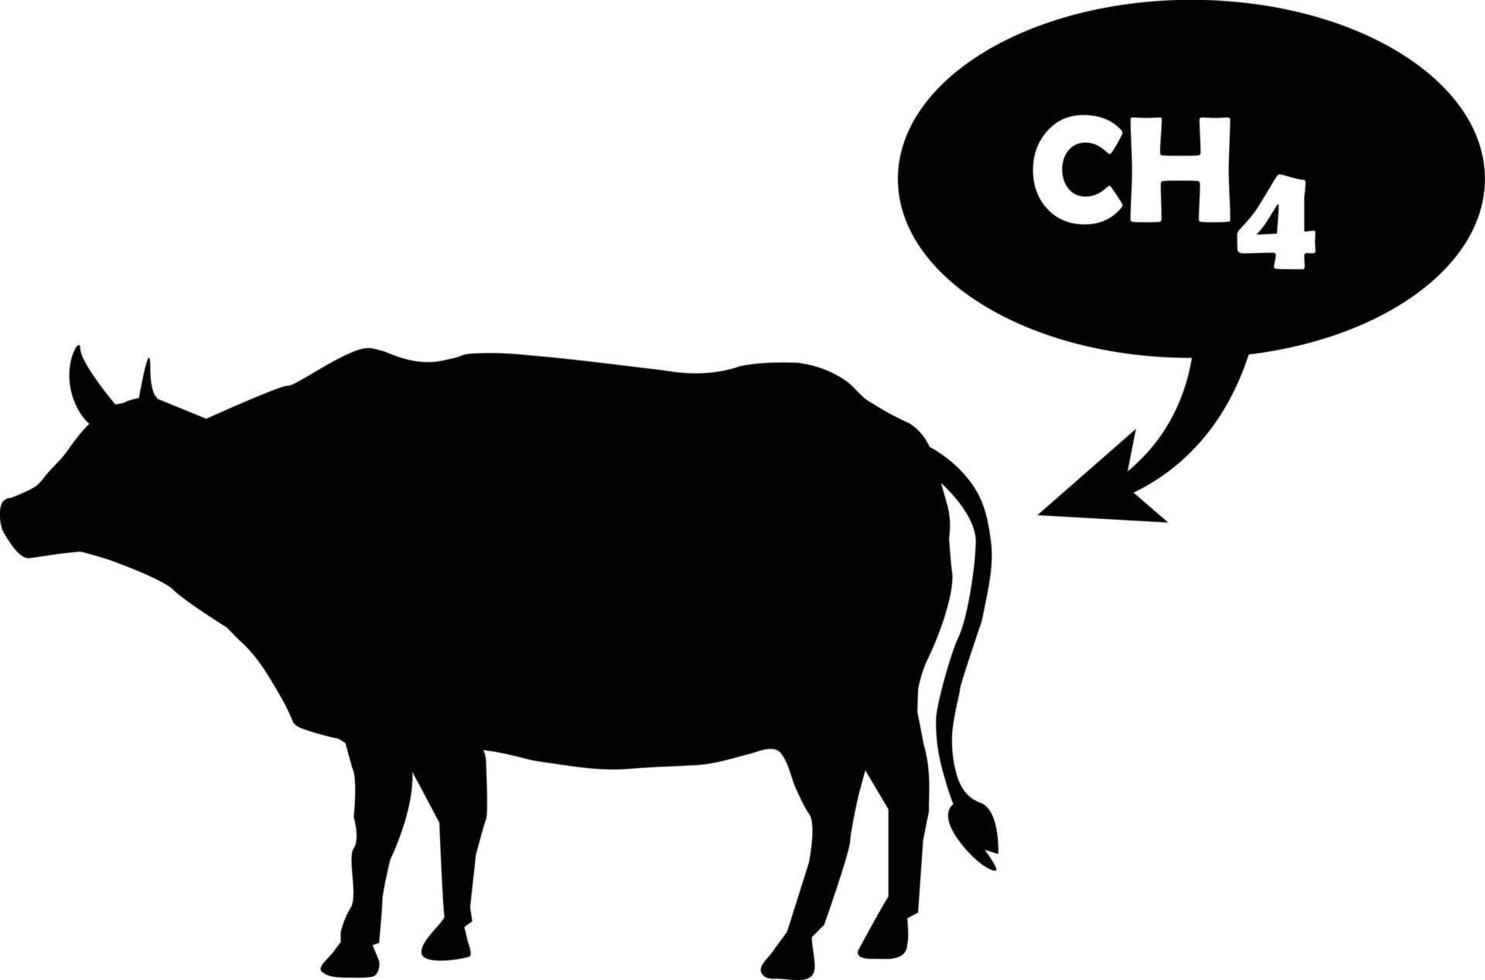 methane is released by the cow. CH4 emissions sign. methane emissions from livestock concept. flat style. vector